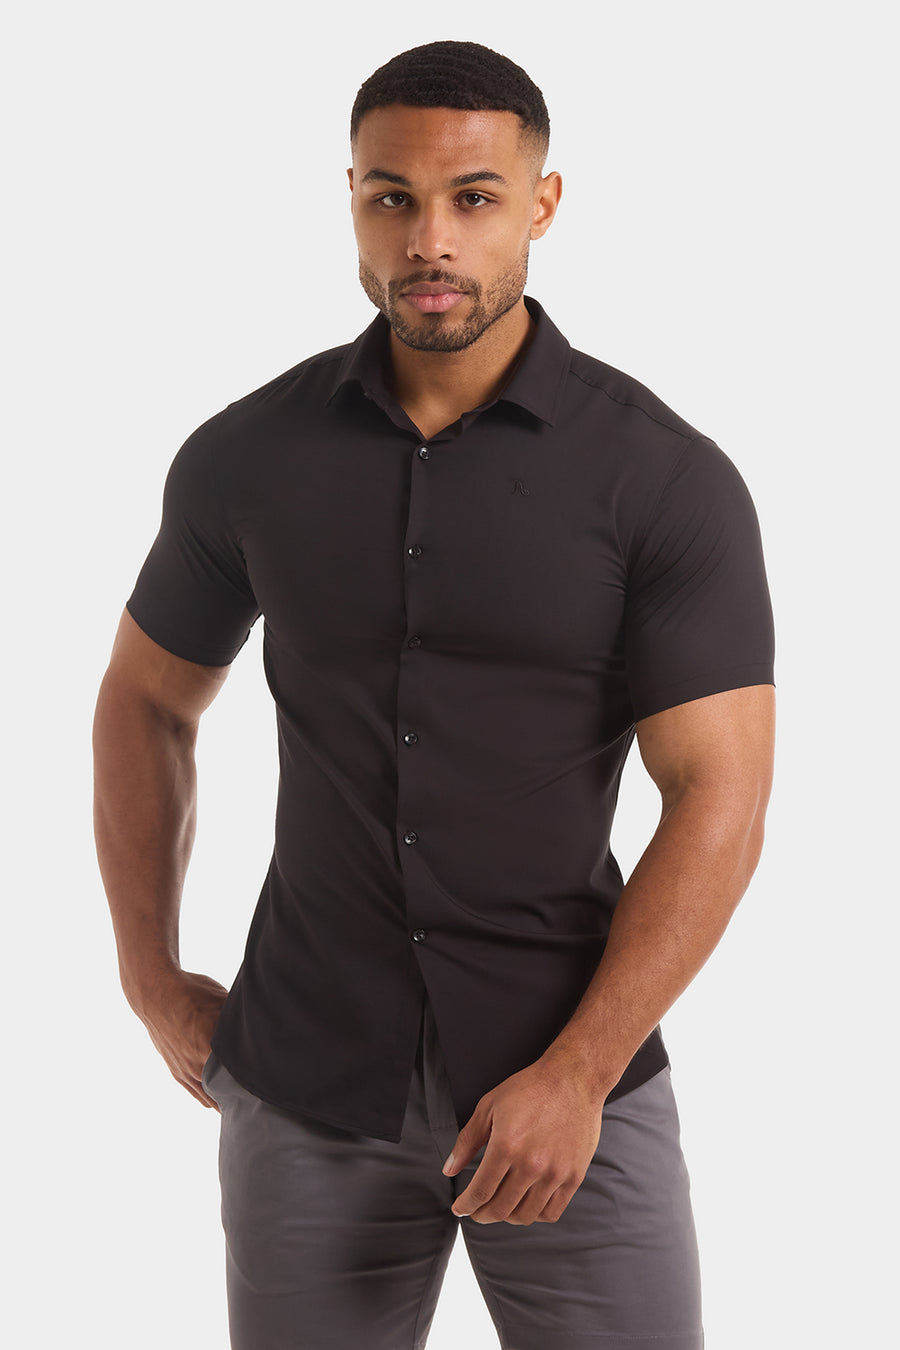 Athletic Fit Dress Shirts - Tailored Athlete Page 2 - TAILORED ATHLETE ...